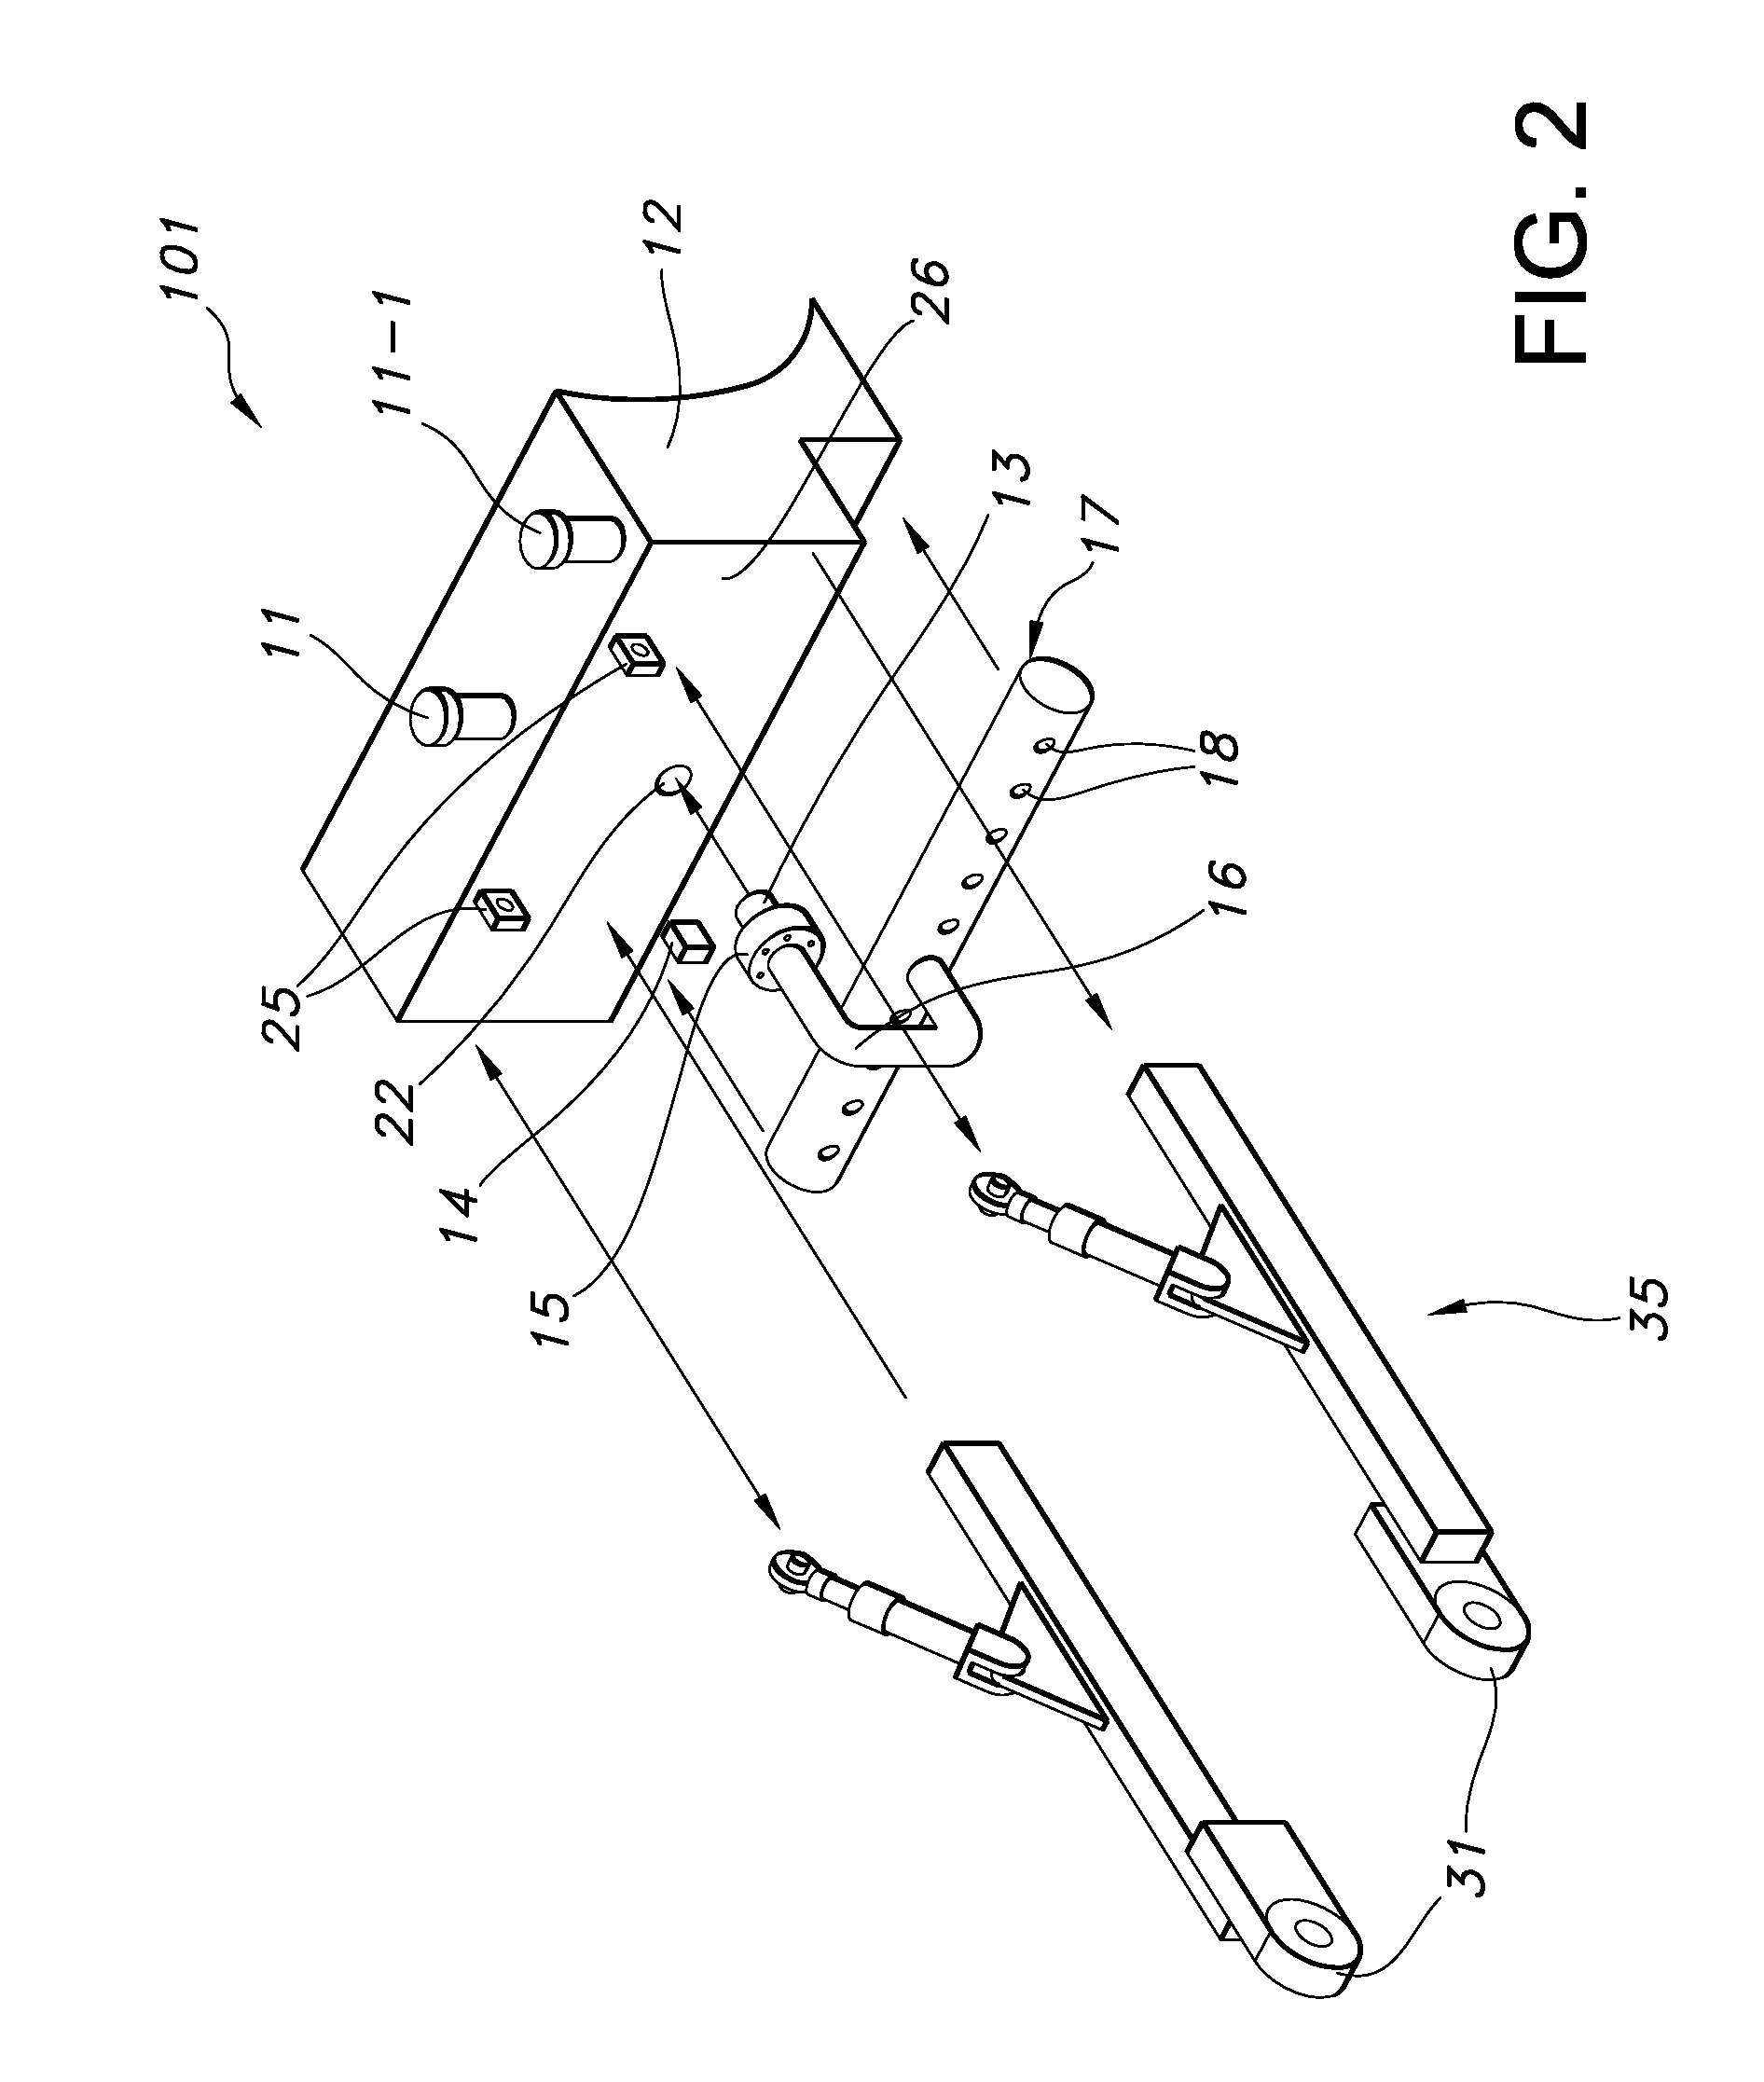 Apparatus and Method to Apply Liquid to Solid Waste Disposal Site